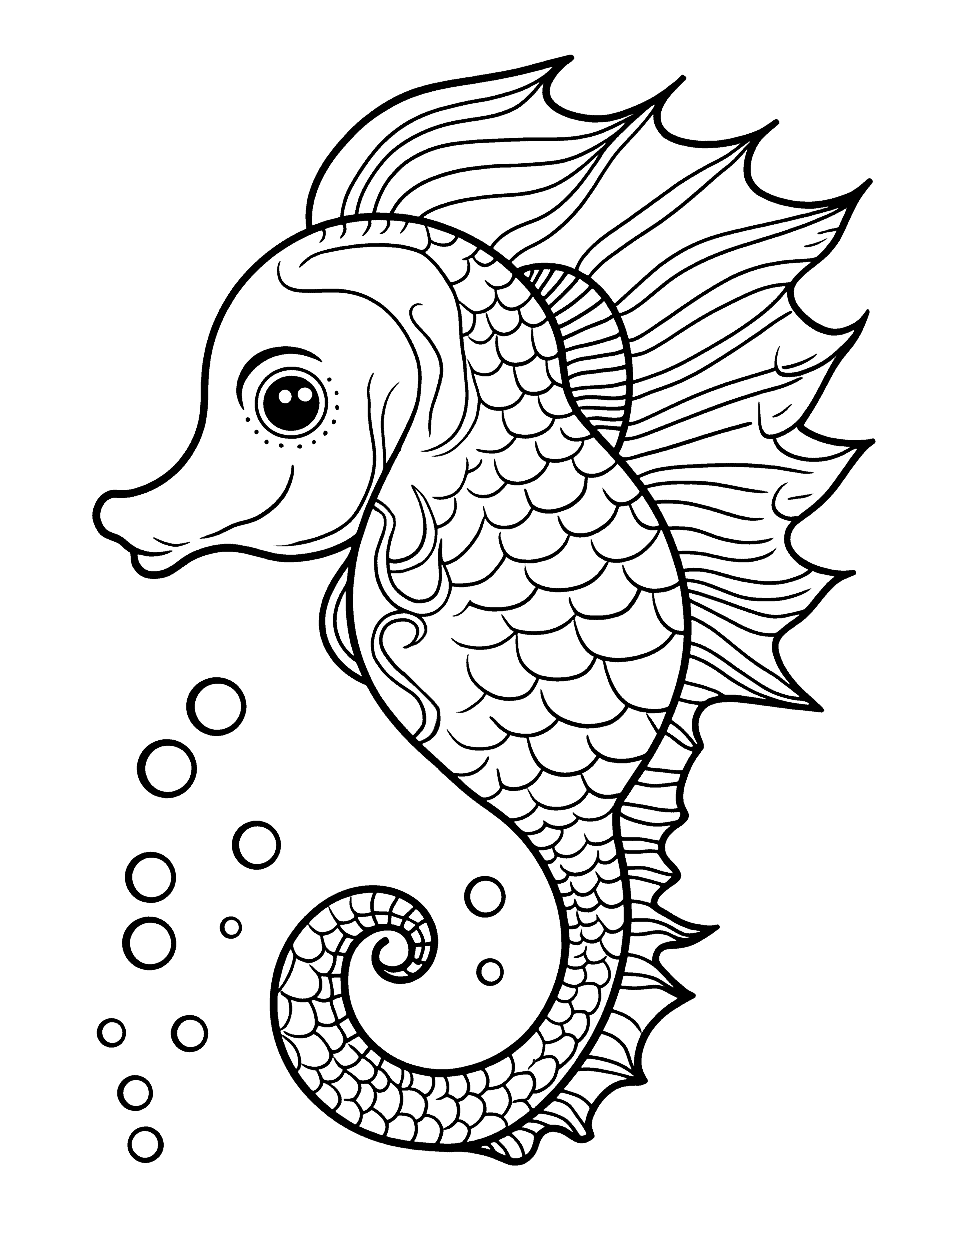 Detailed Seahorse Dream Fish Coloring Page - A detailed drawing of a seahorse showcasing its intricate patterns.